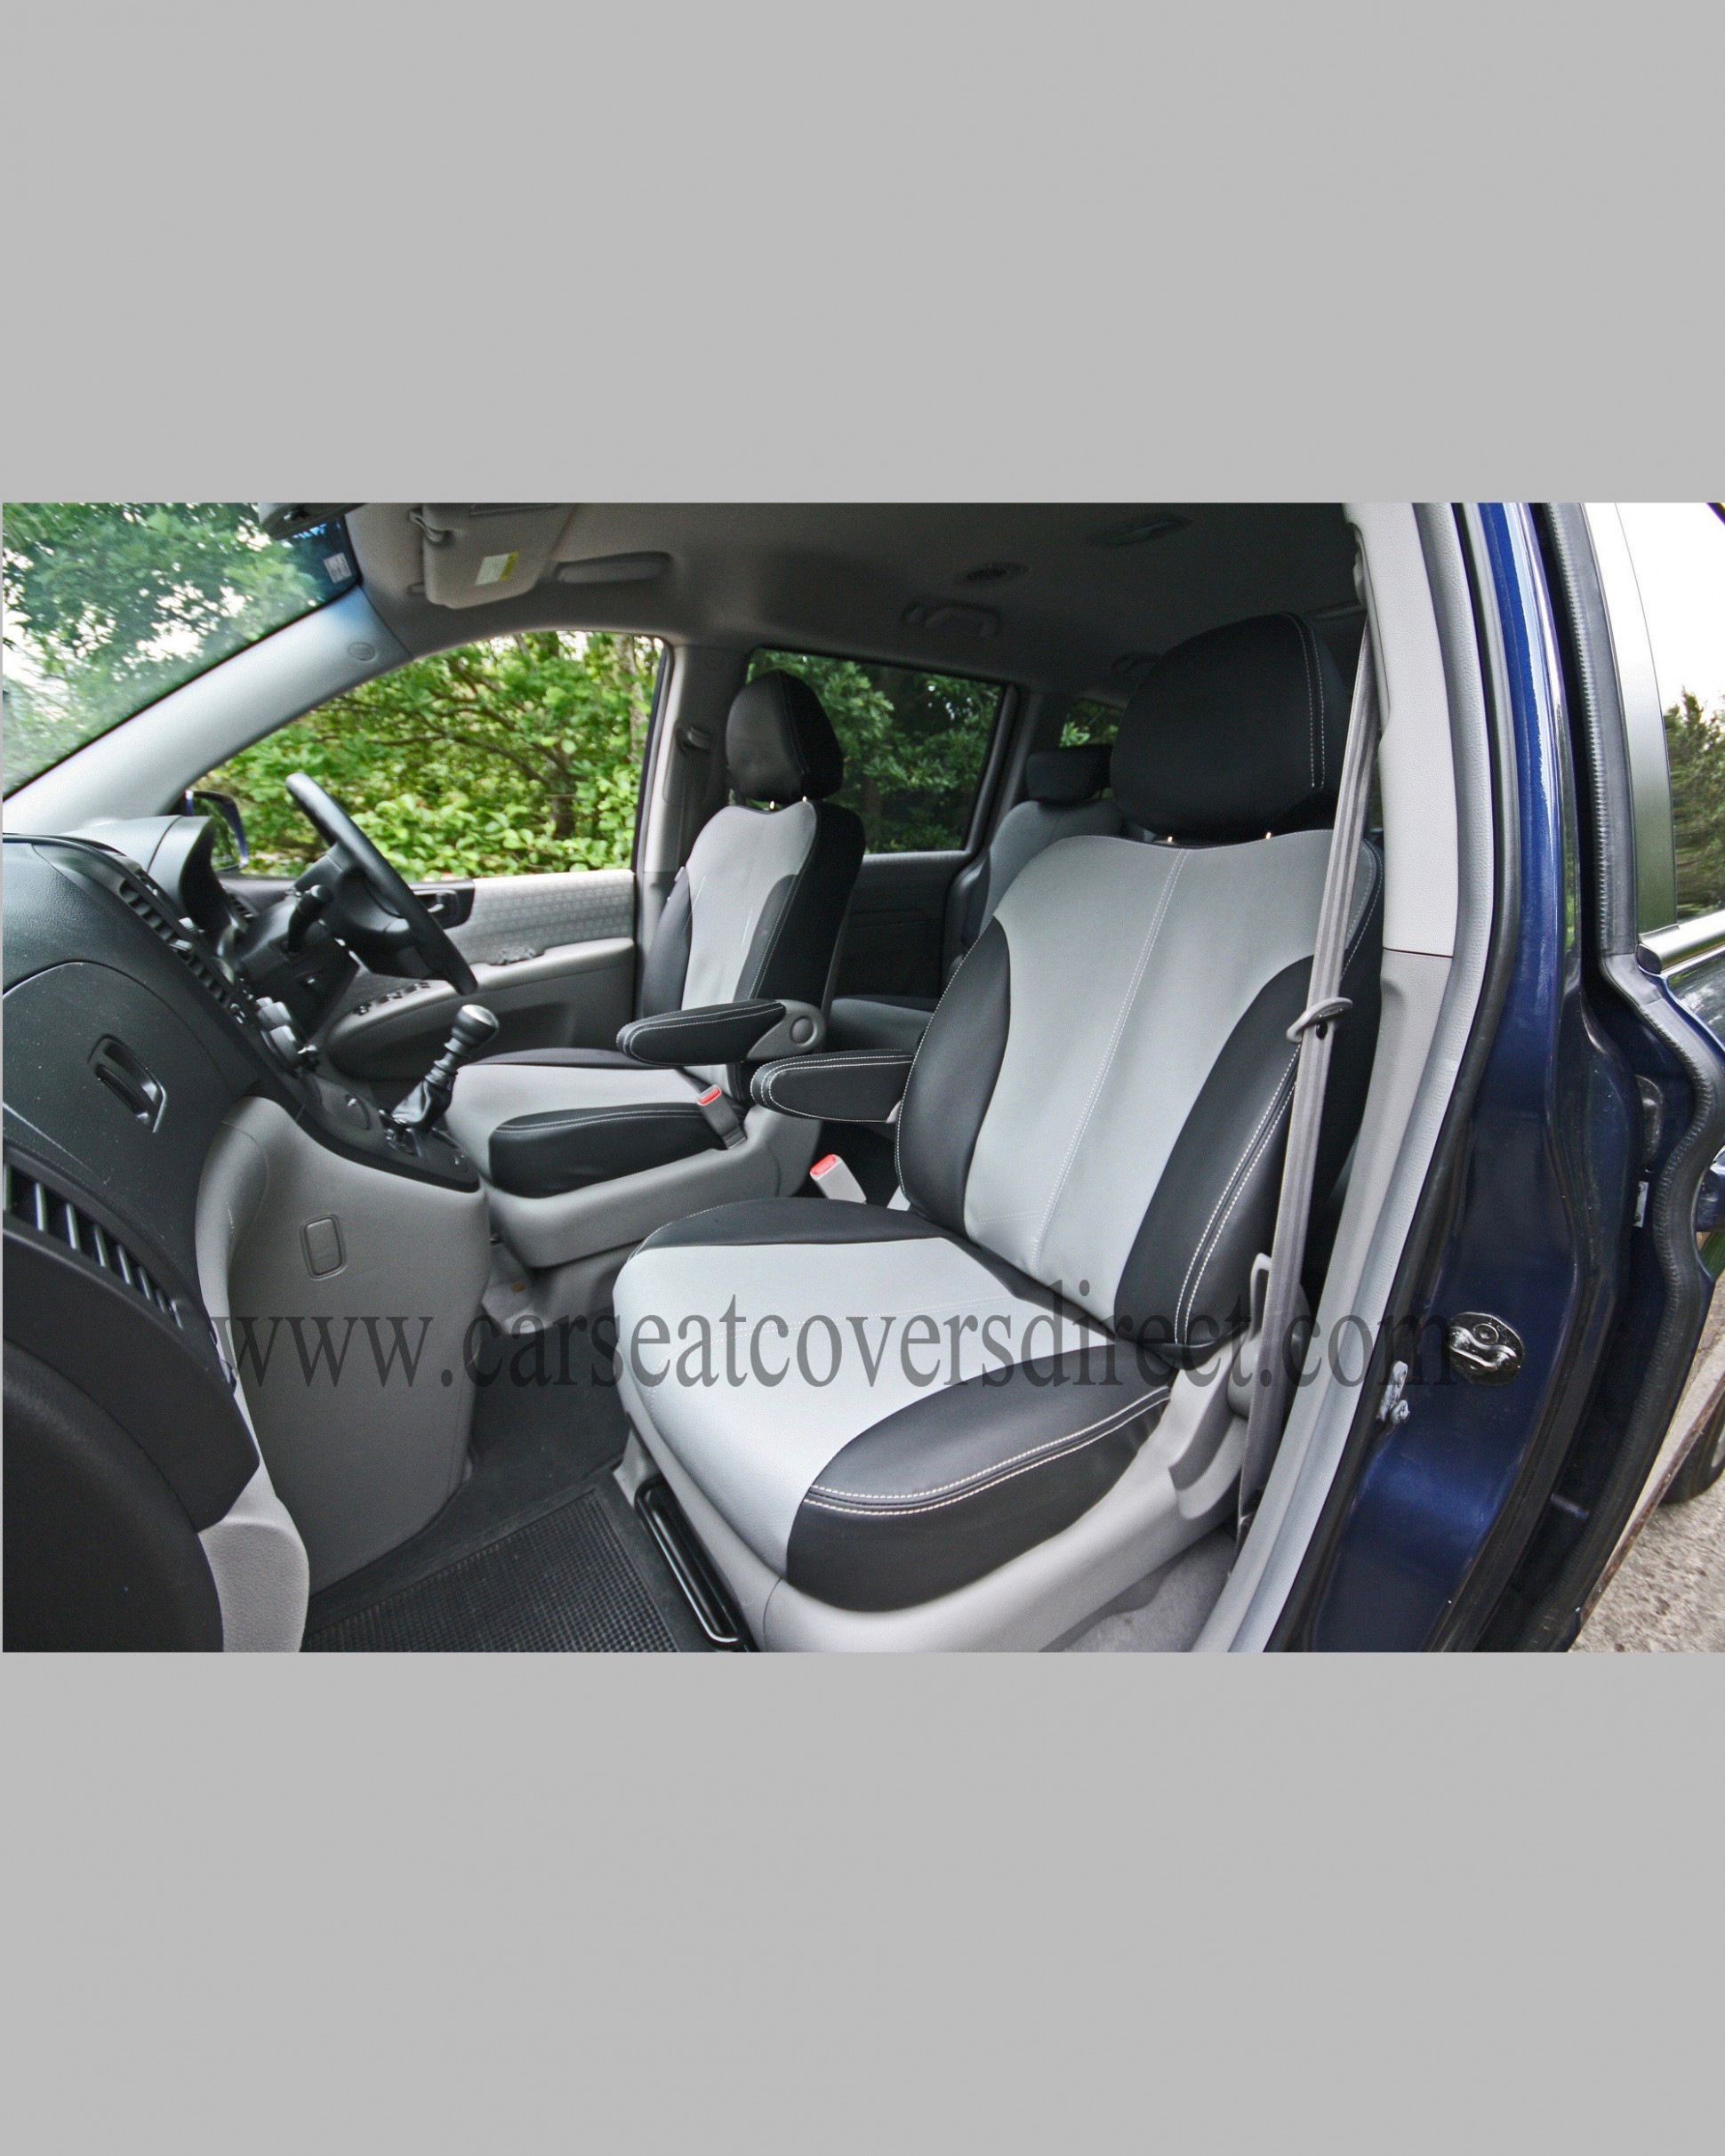 Redesign and Review kia sedona seat covers